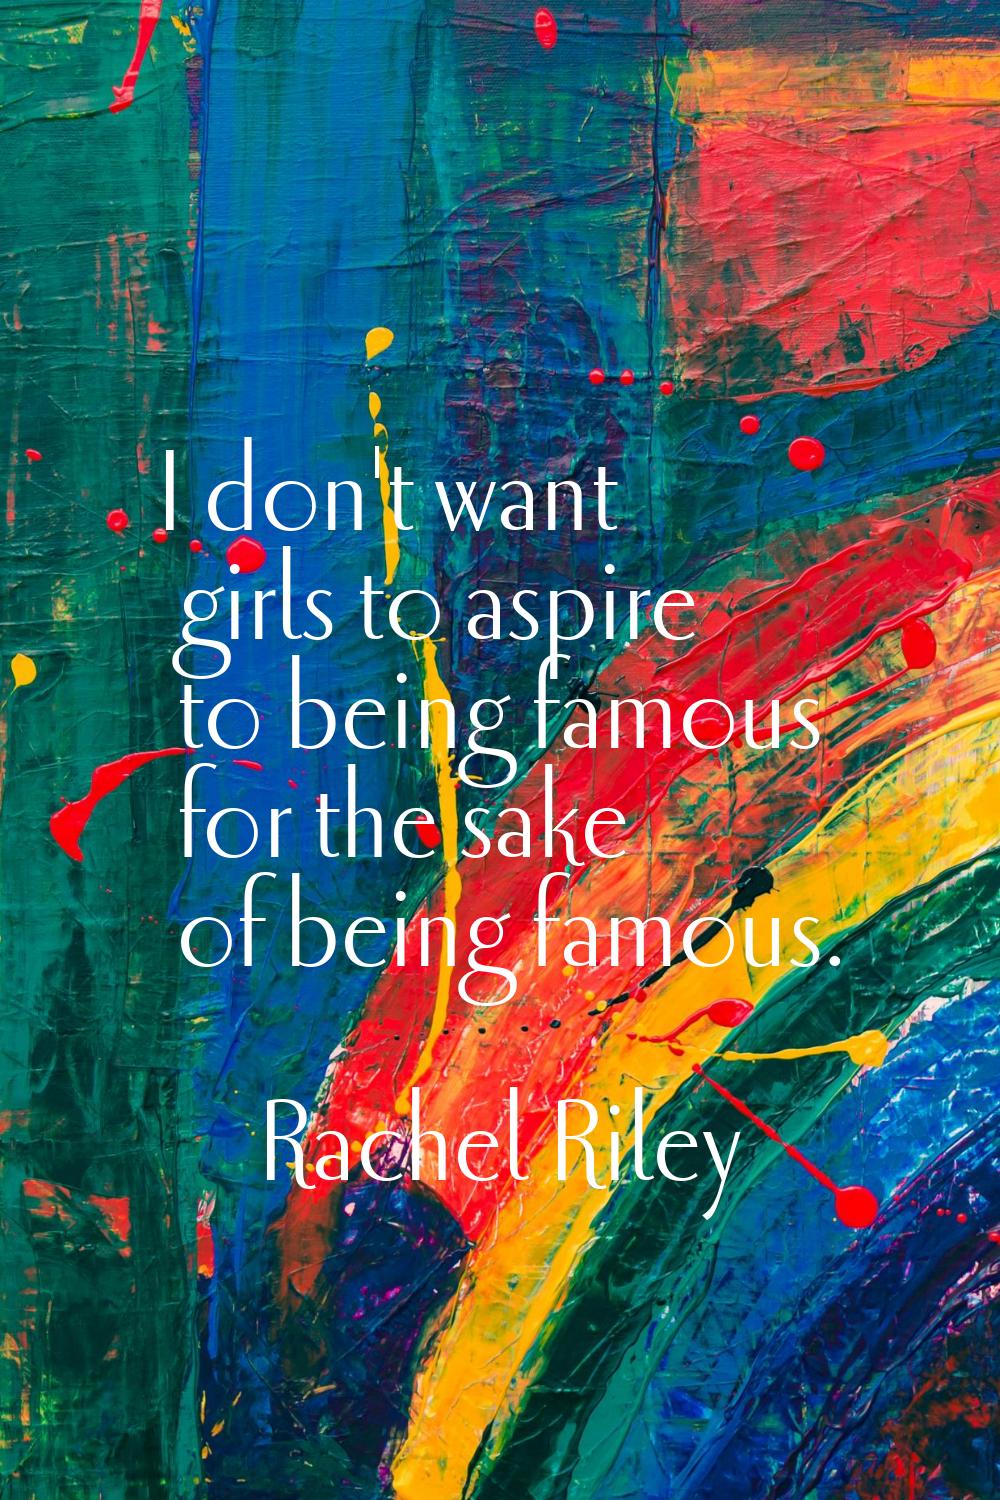 I don't want girls to aspire to being famous for the sake of being famous.